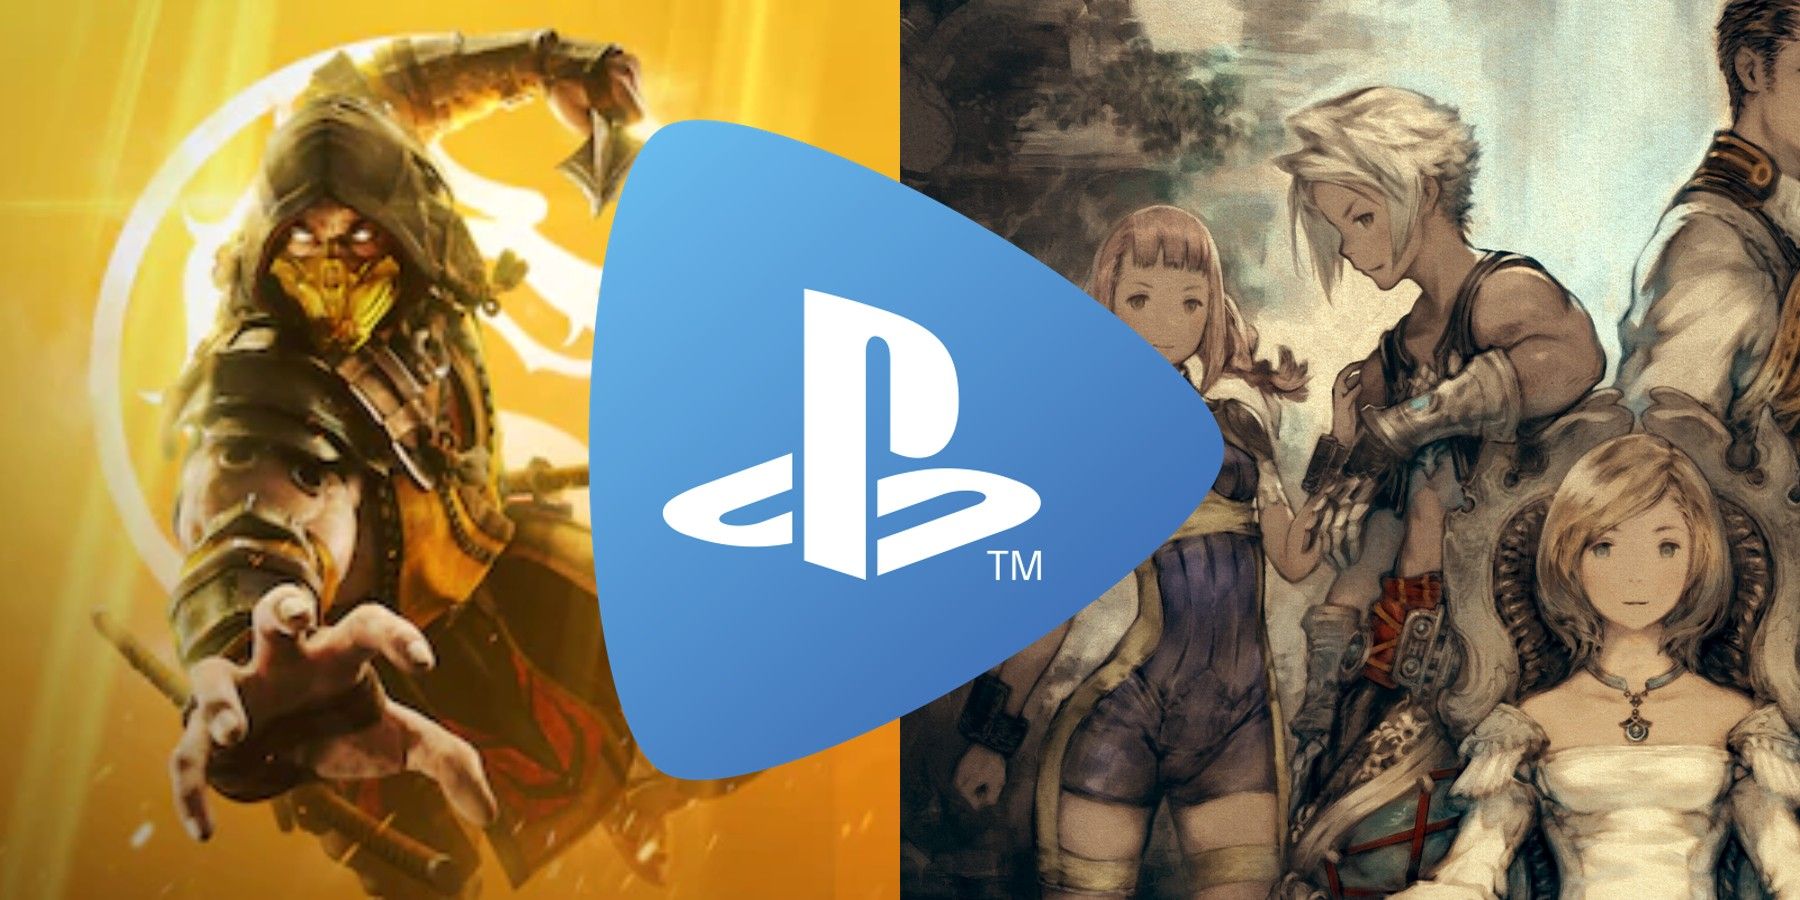 PlayStation Now games for January 2022: Mortal Kombat 11, Final Fantasy  XII: The Zodiac Age, Fury Unleashed – PlayStation.Blog